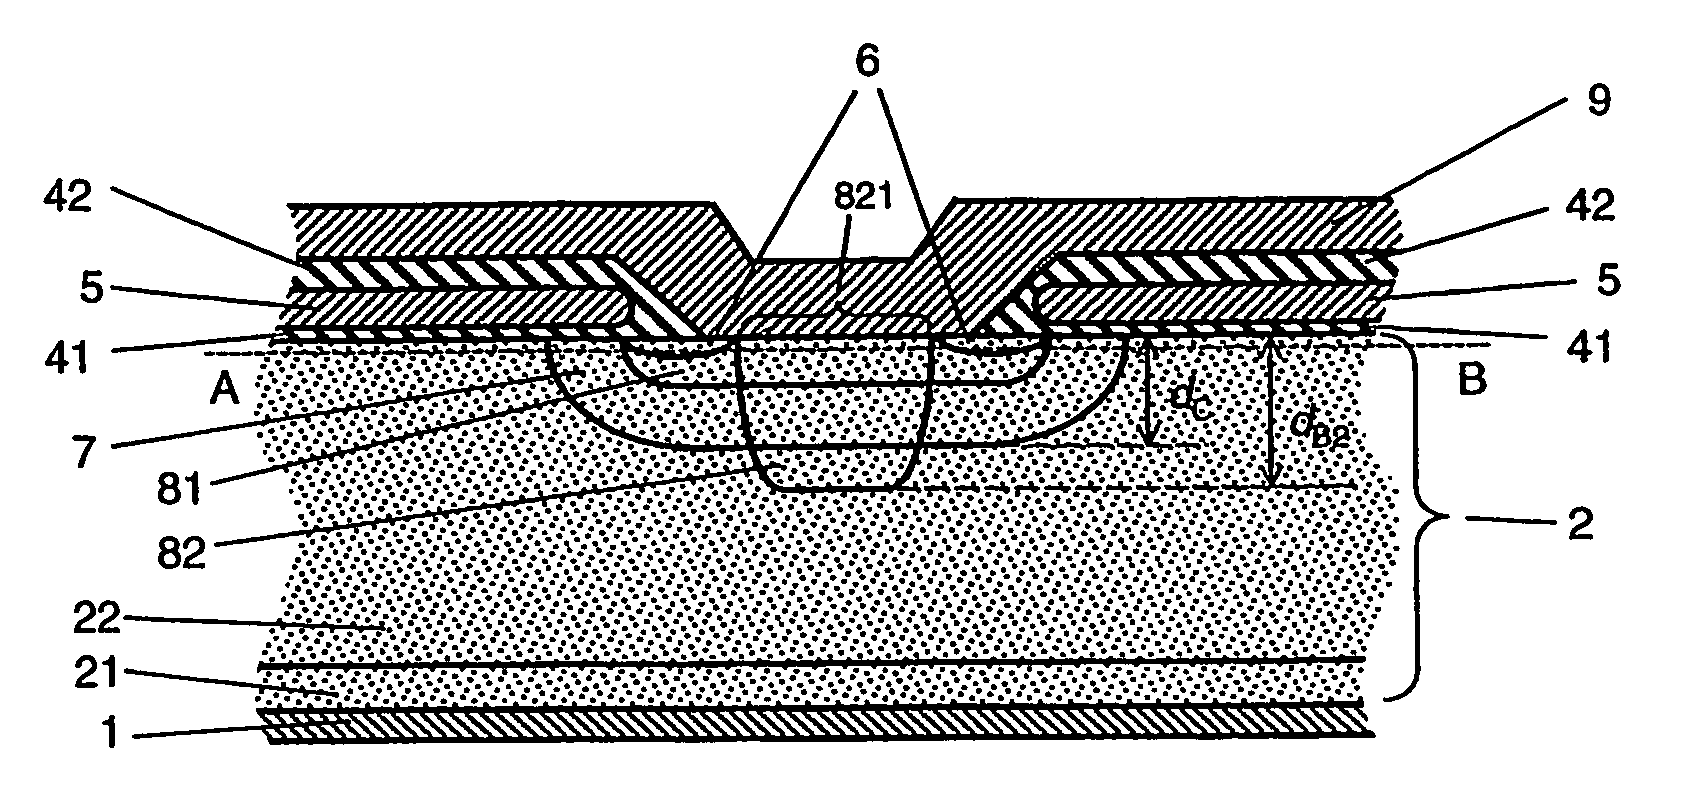 Igbt cathode design with improved safe operating area capability